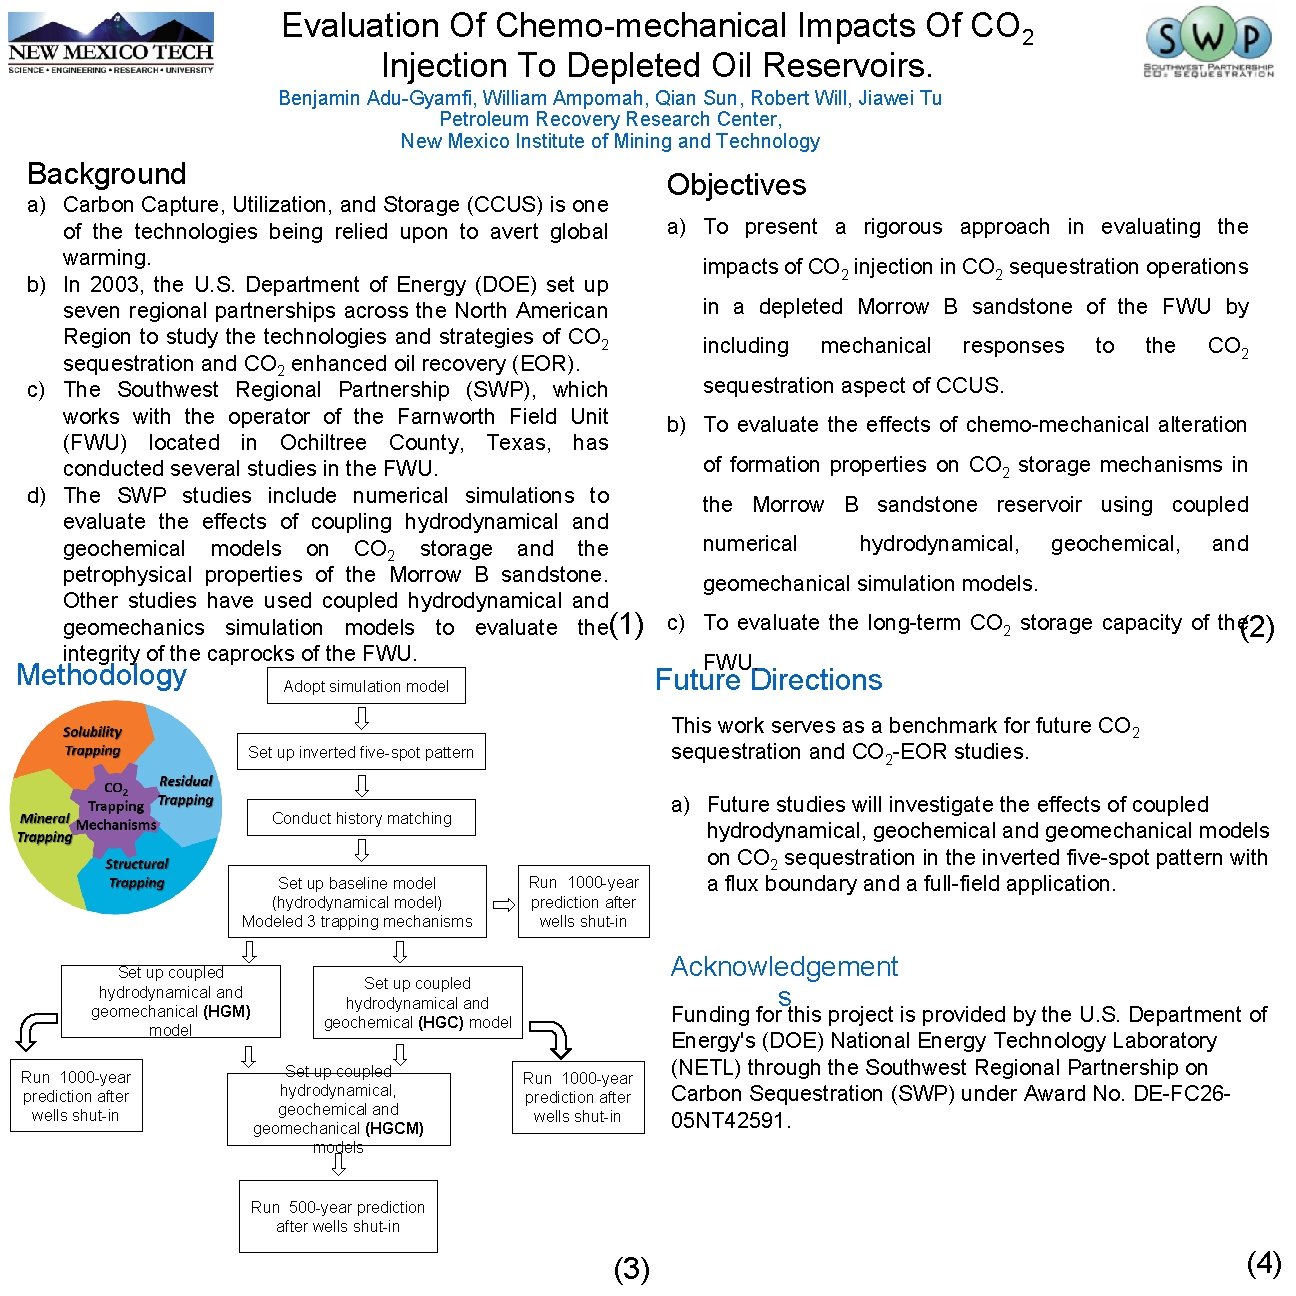 Evaluation Of Chemo-mechanical Impacts Of CO 2 Injection To Depleted Oil Reservoirs. Benjamin Adu-Gyamfi,